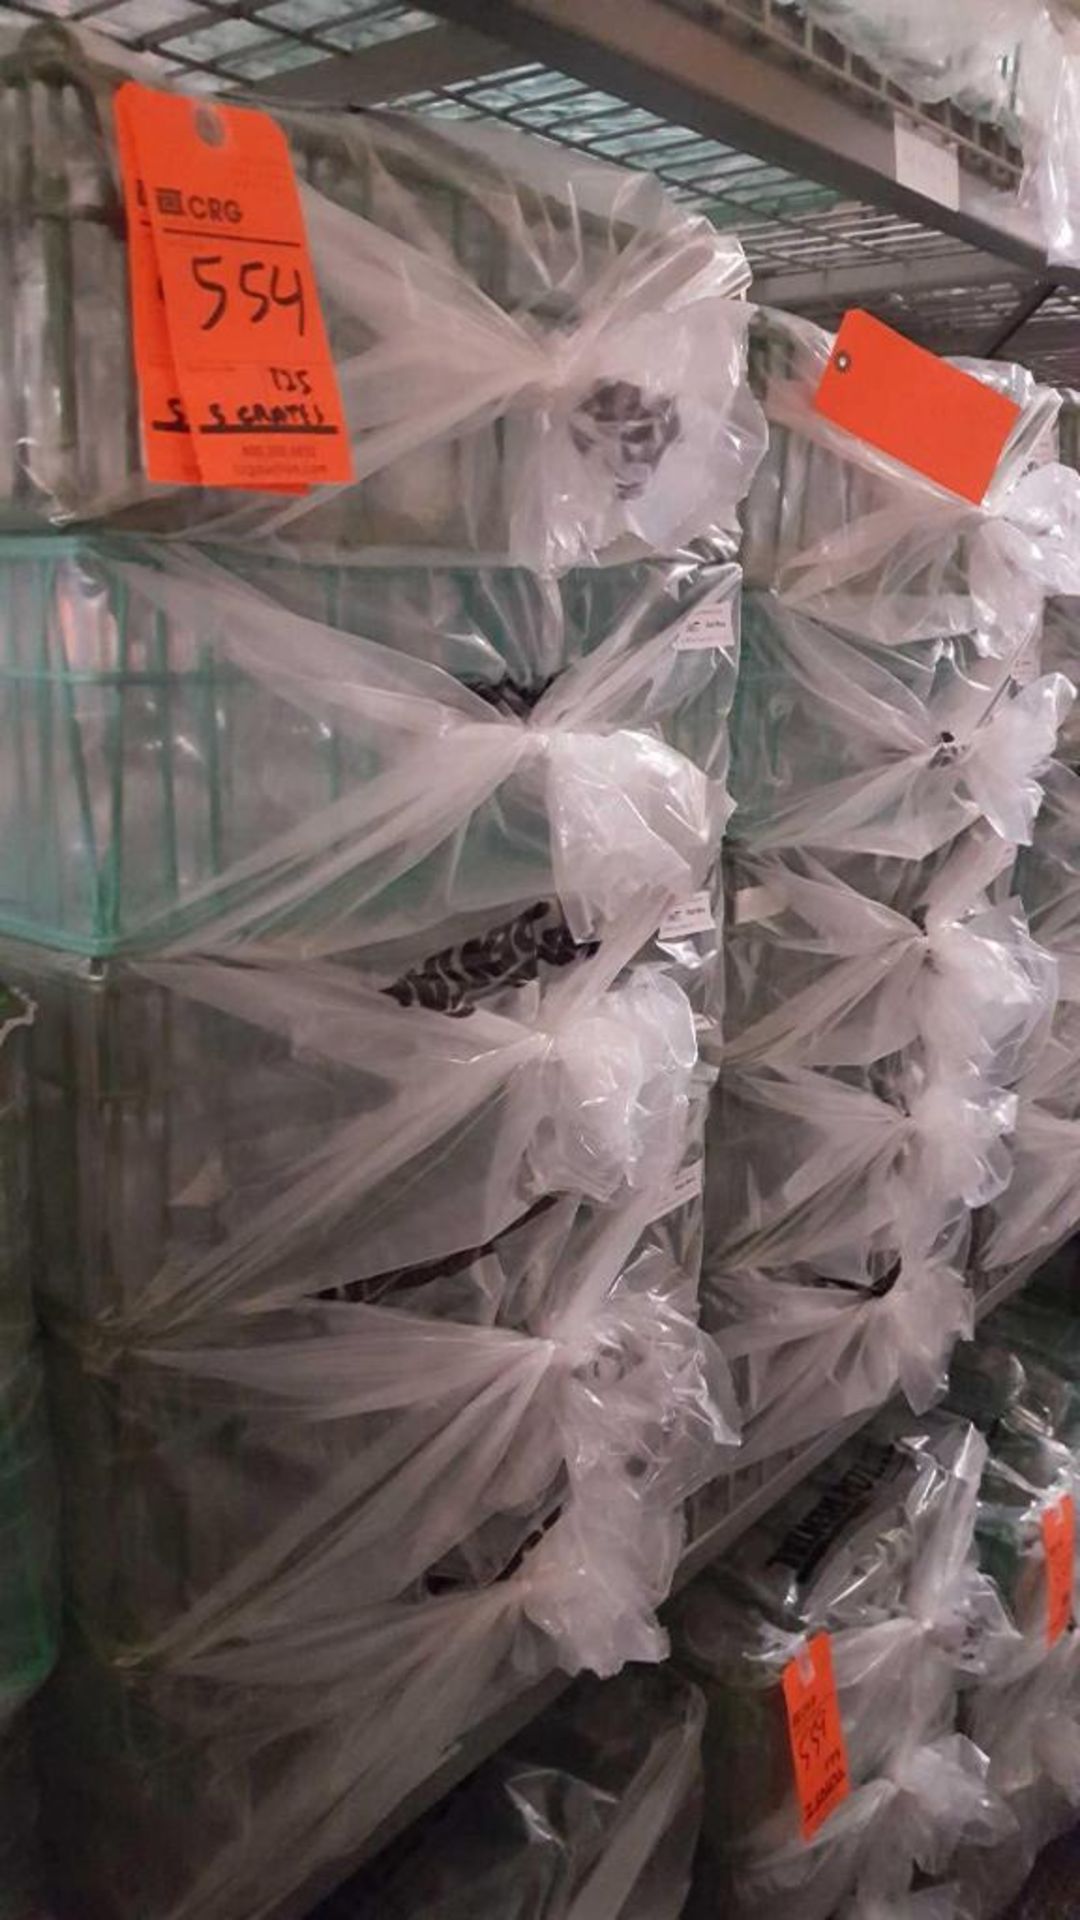 Lot of (250) red wine glasses, with (10) wire crates. Add'l fee of $8.00 per wire crate - Image 3 of 3